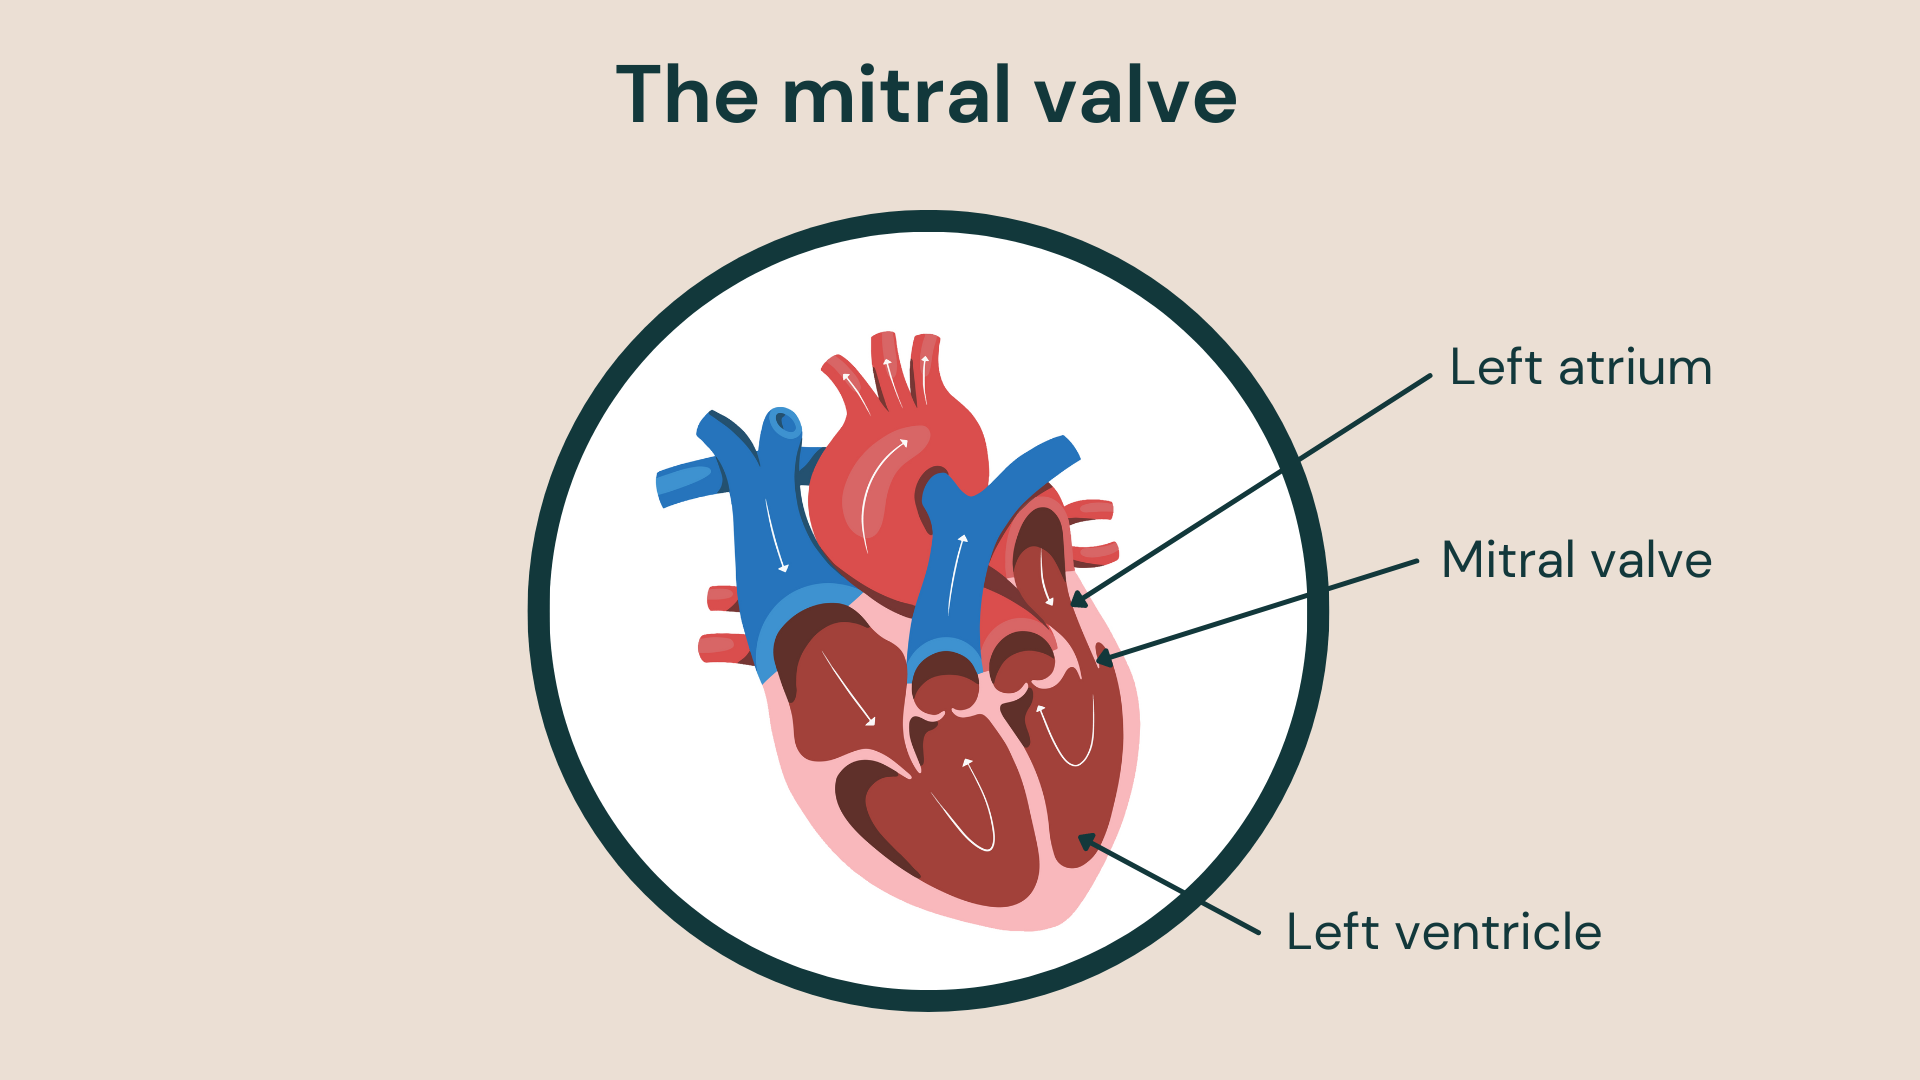 The mitral valve is one of the heart’s four valves.